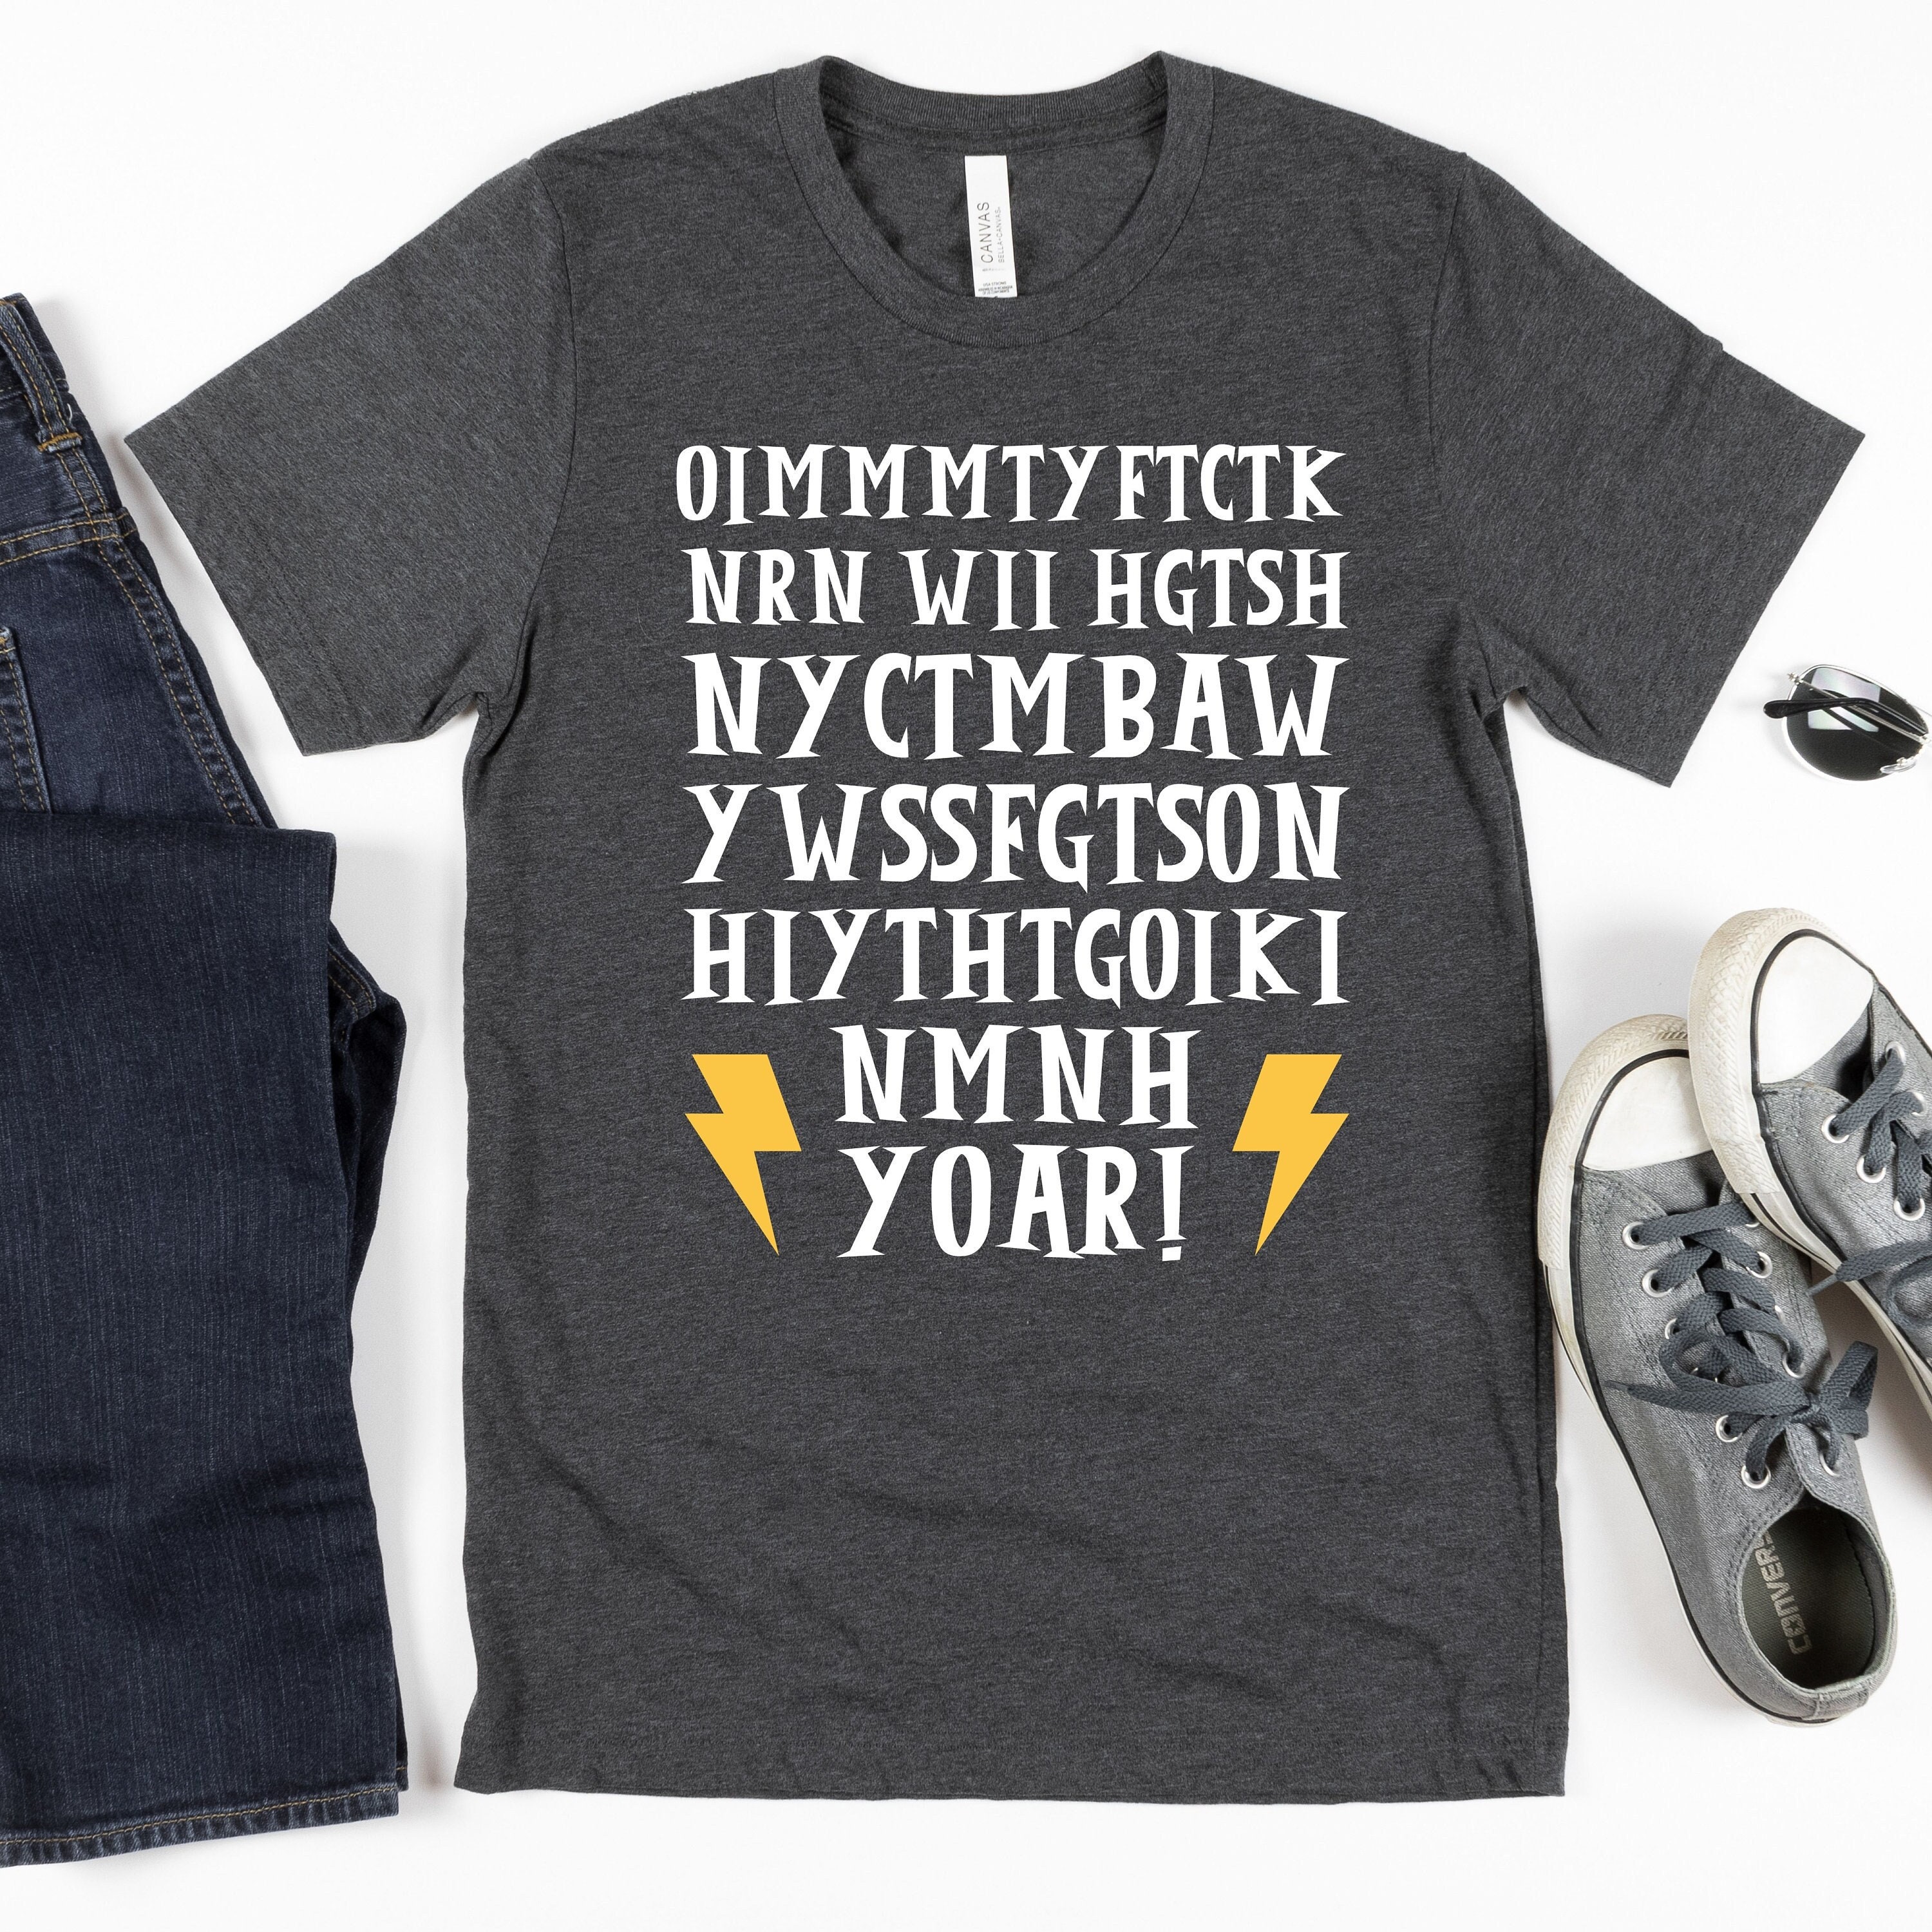 Once I Make My Move You're Free To Check The King Shirt Chess Wizard Sweatshirt Not Me Not Hermione You Sweatshirt Wizarding Hoodie Kleding Gender-neutrale kleding volwassenen Tops & T-shirts T-shirts T-shirts met print 